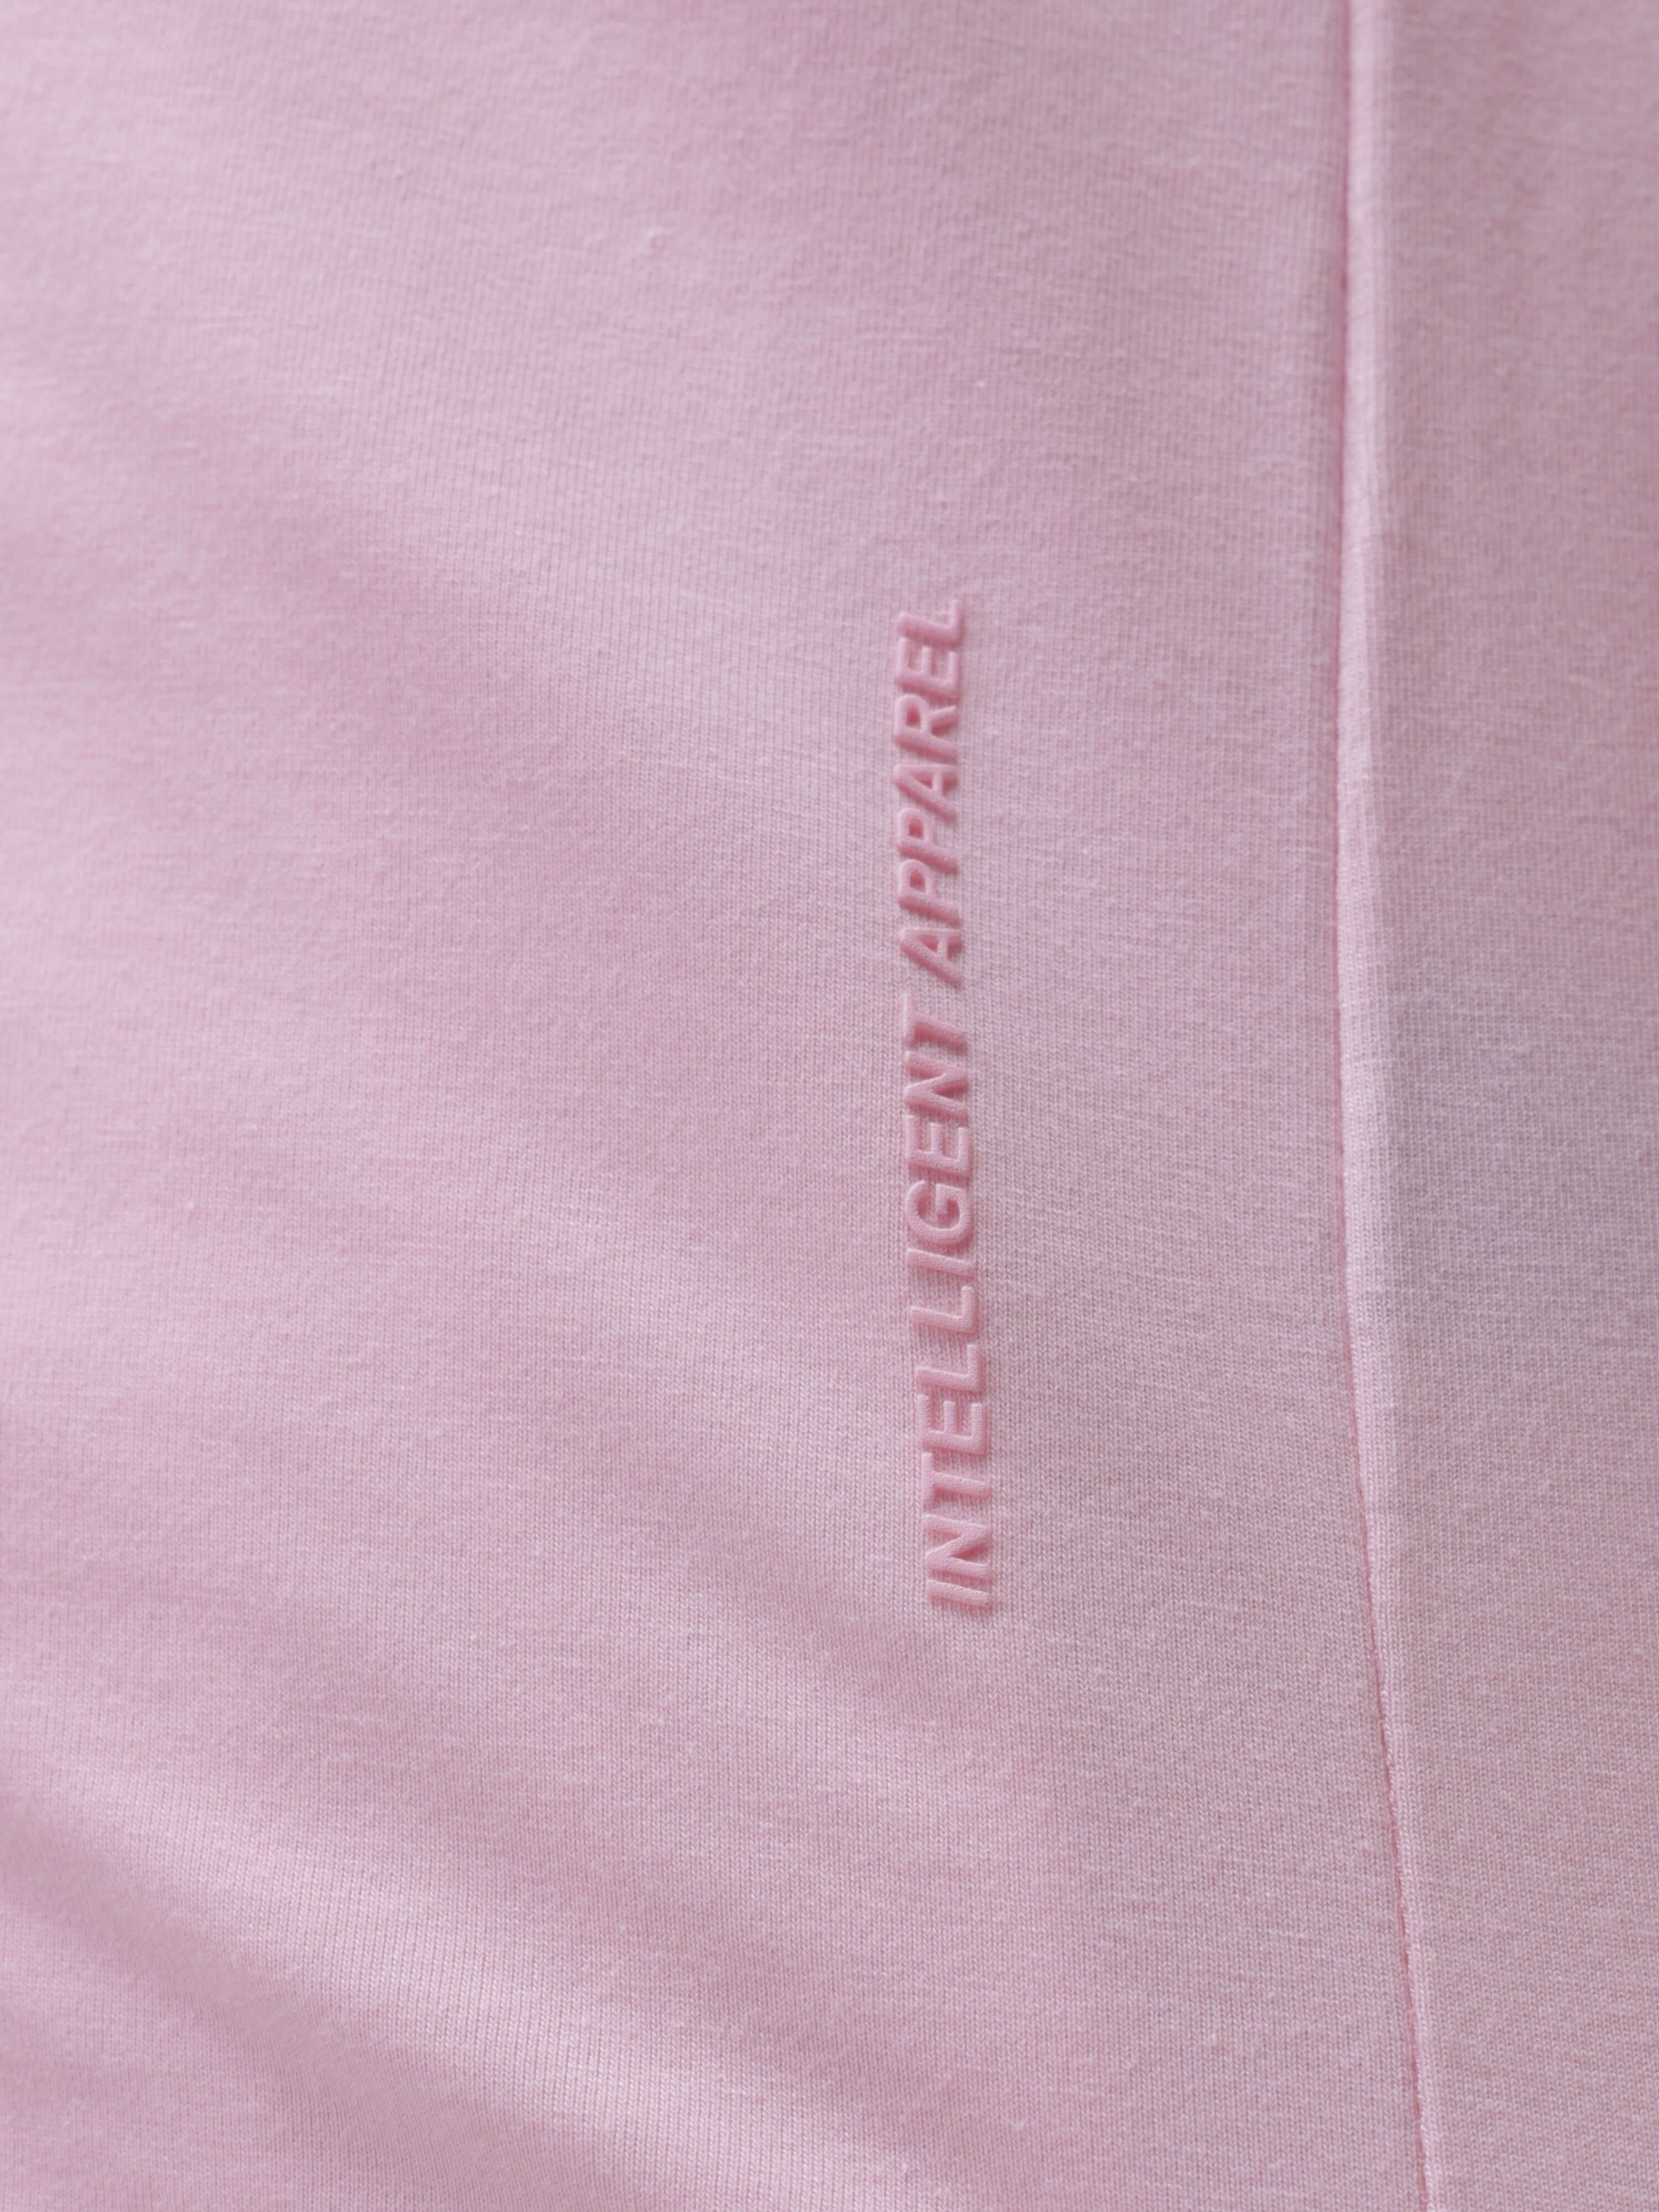 Close-up of pink Turms intelligent apparel with anti-stain, anti-odor, and stretchable fabric featuring "INTELLIGENT APPAREL" text